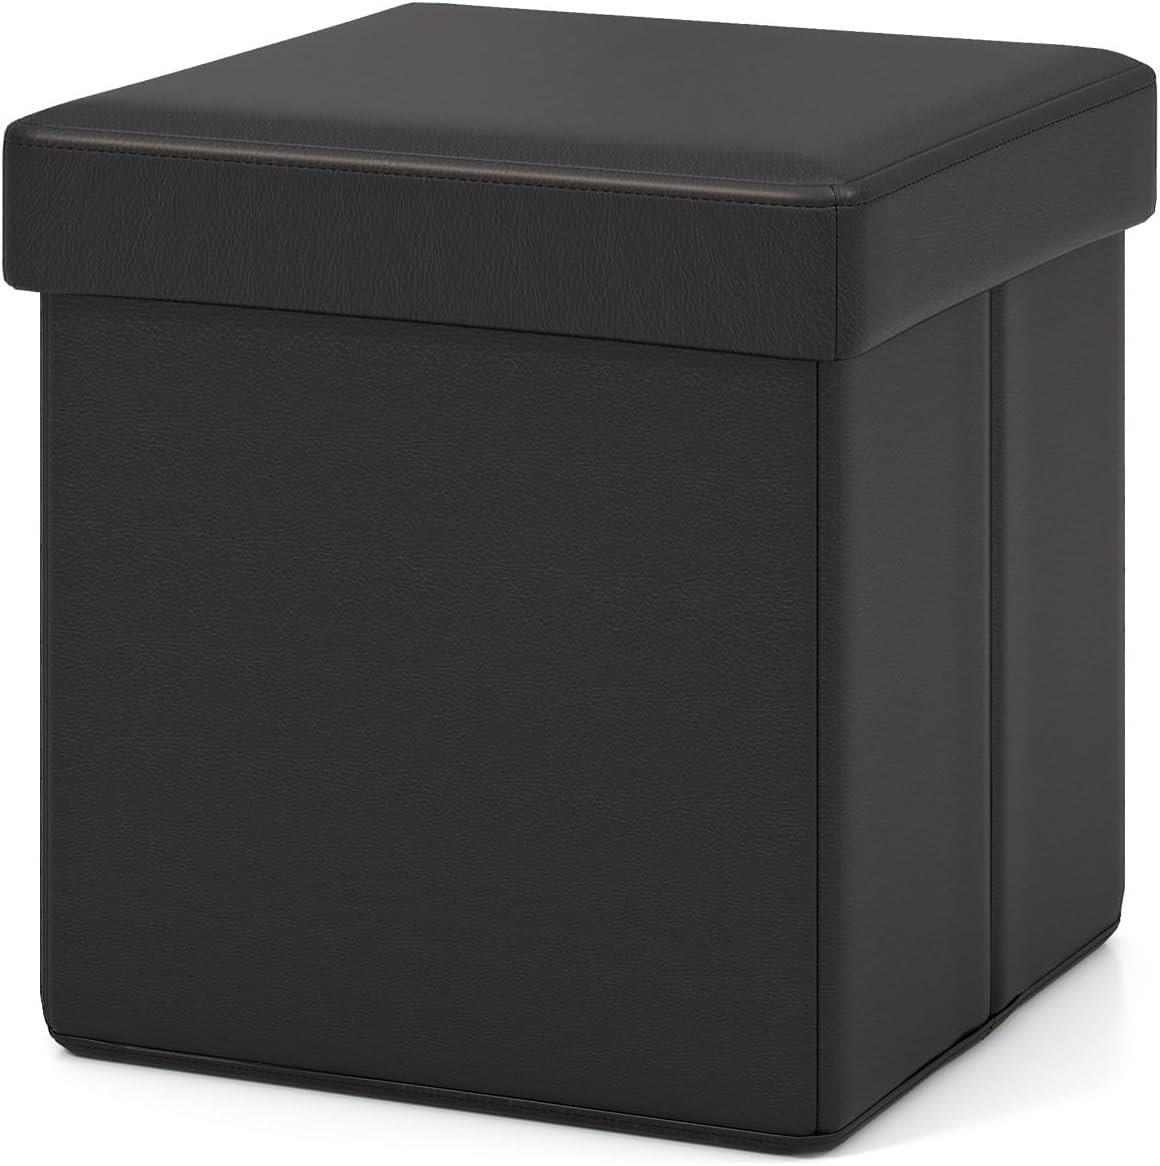 Giantex Cube Storage Ottoman - 15 Inches Folding Ottoman Storage Chest, PVC Leather, Upholstered Footrest